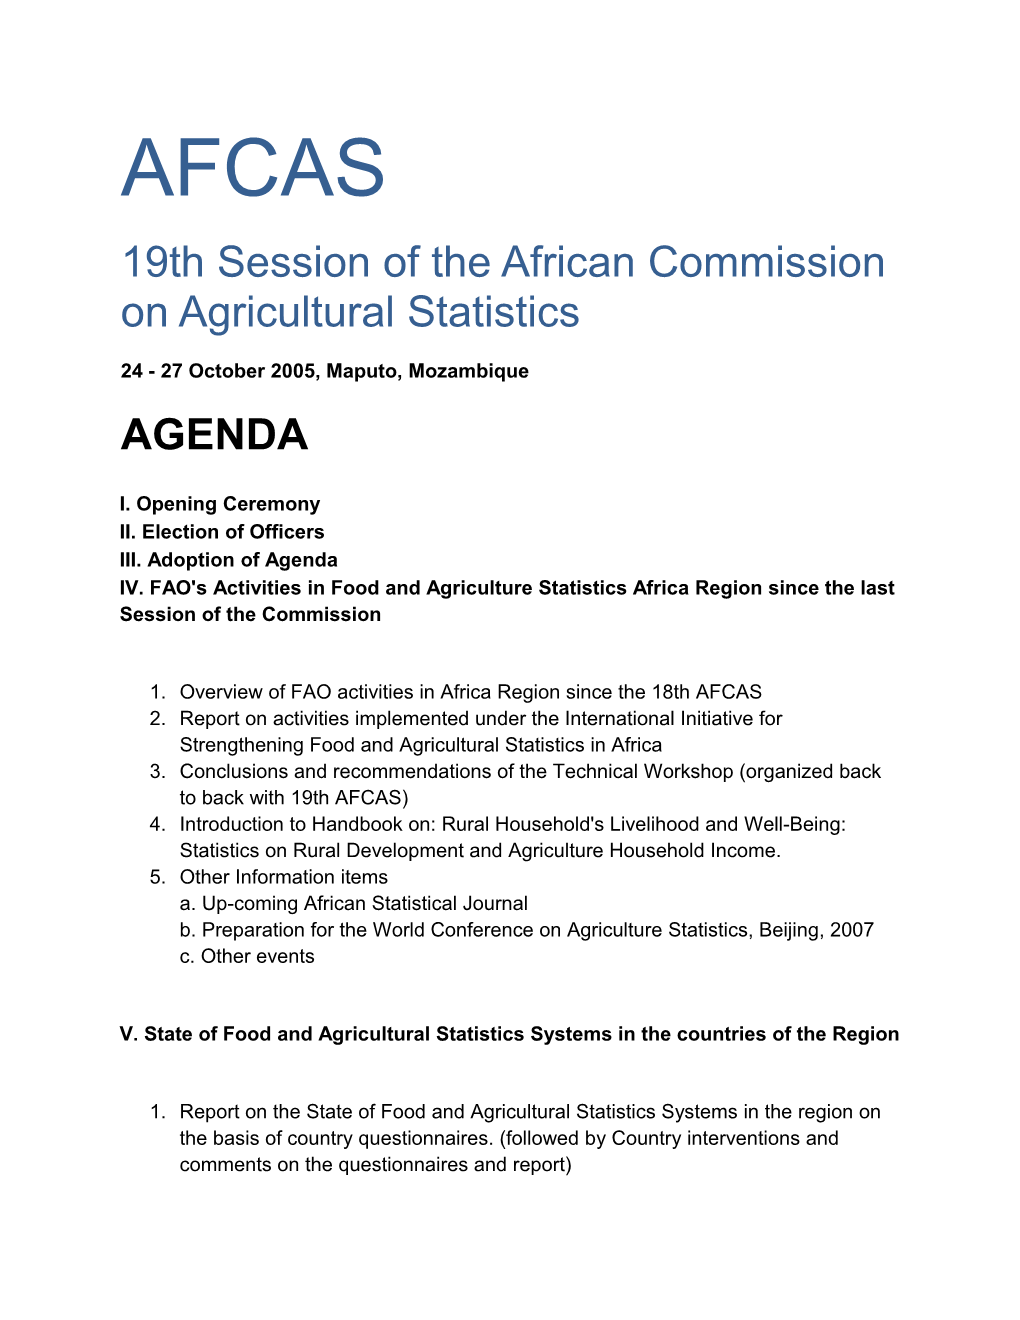 19Th Session of the African Commission on Agricultural Statistics